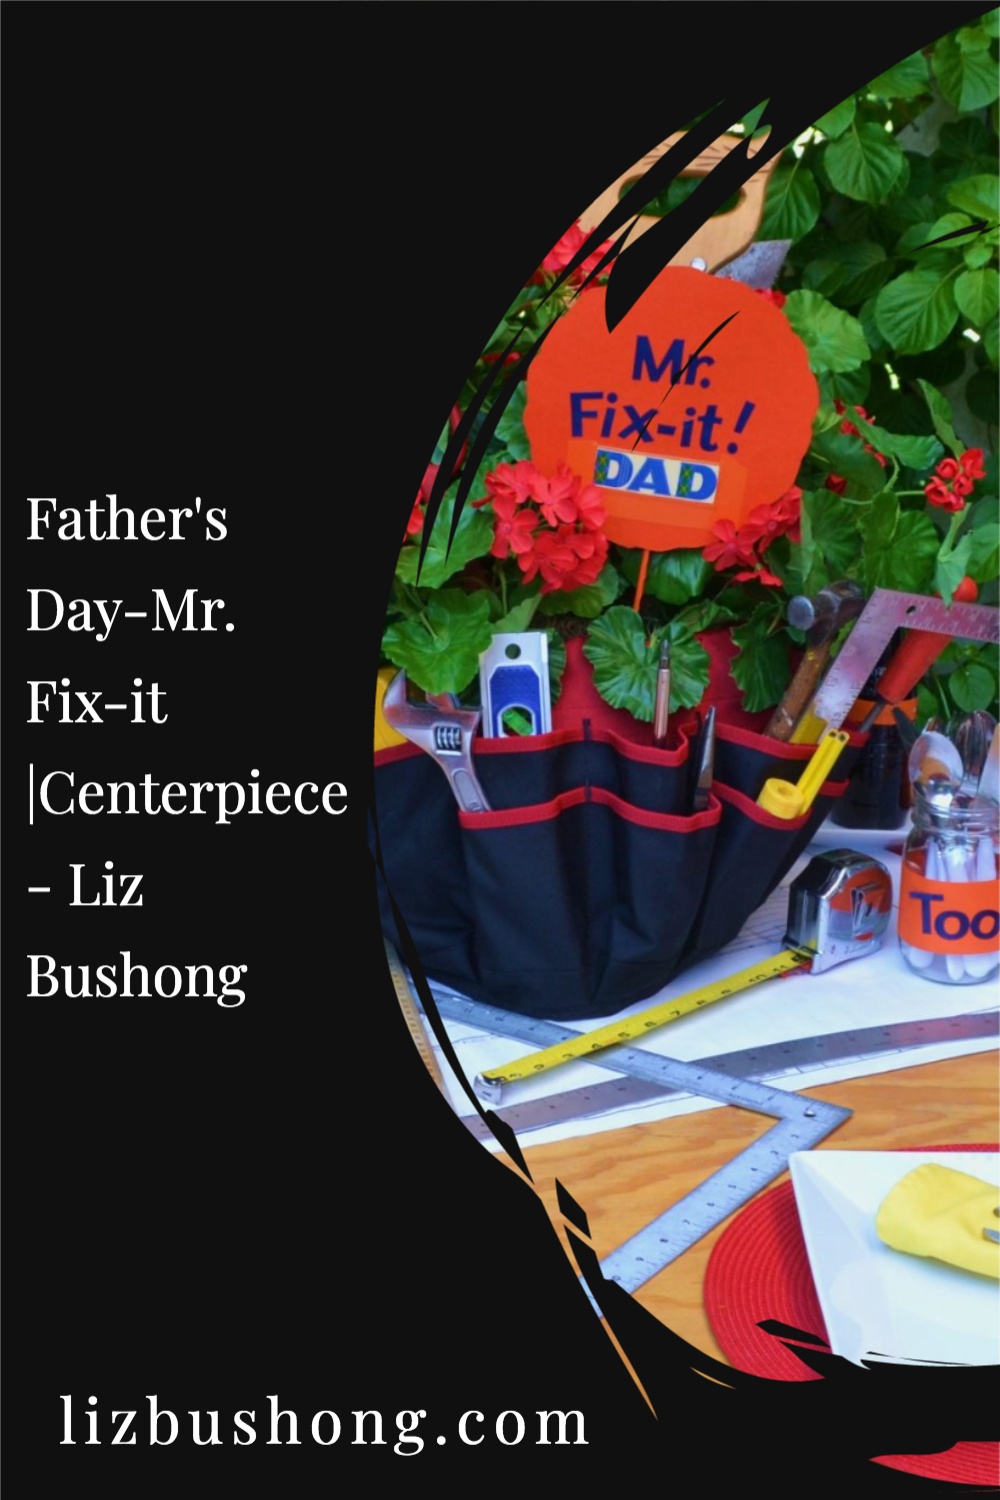 How to make a tool time tablesetting for dad lizbushong.com